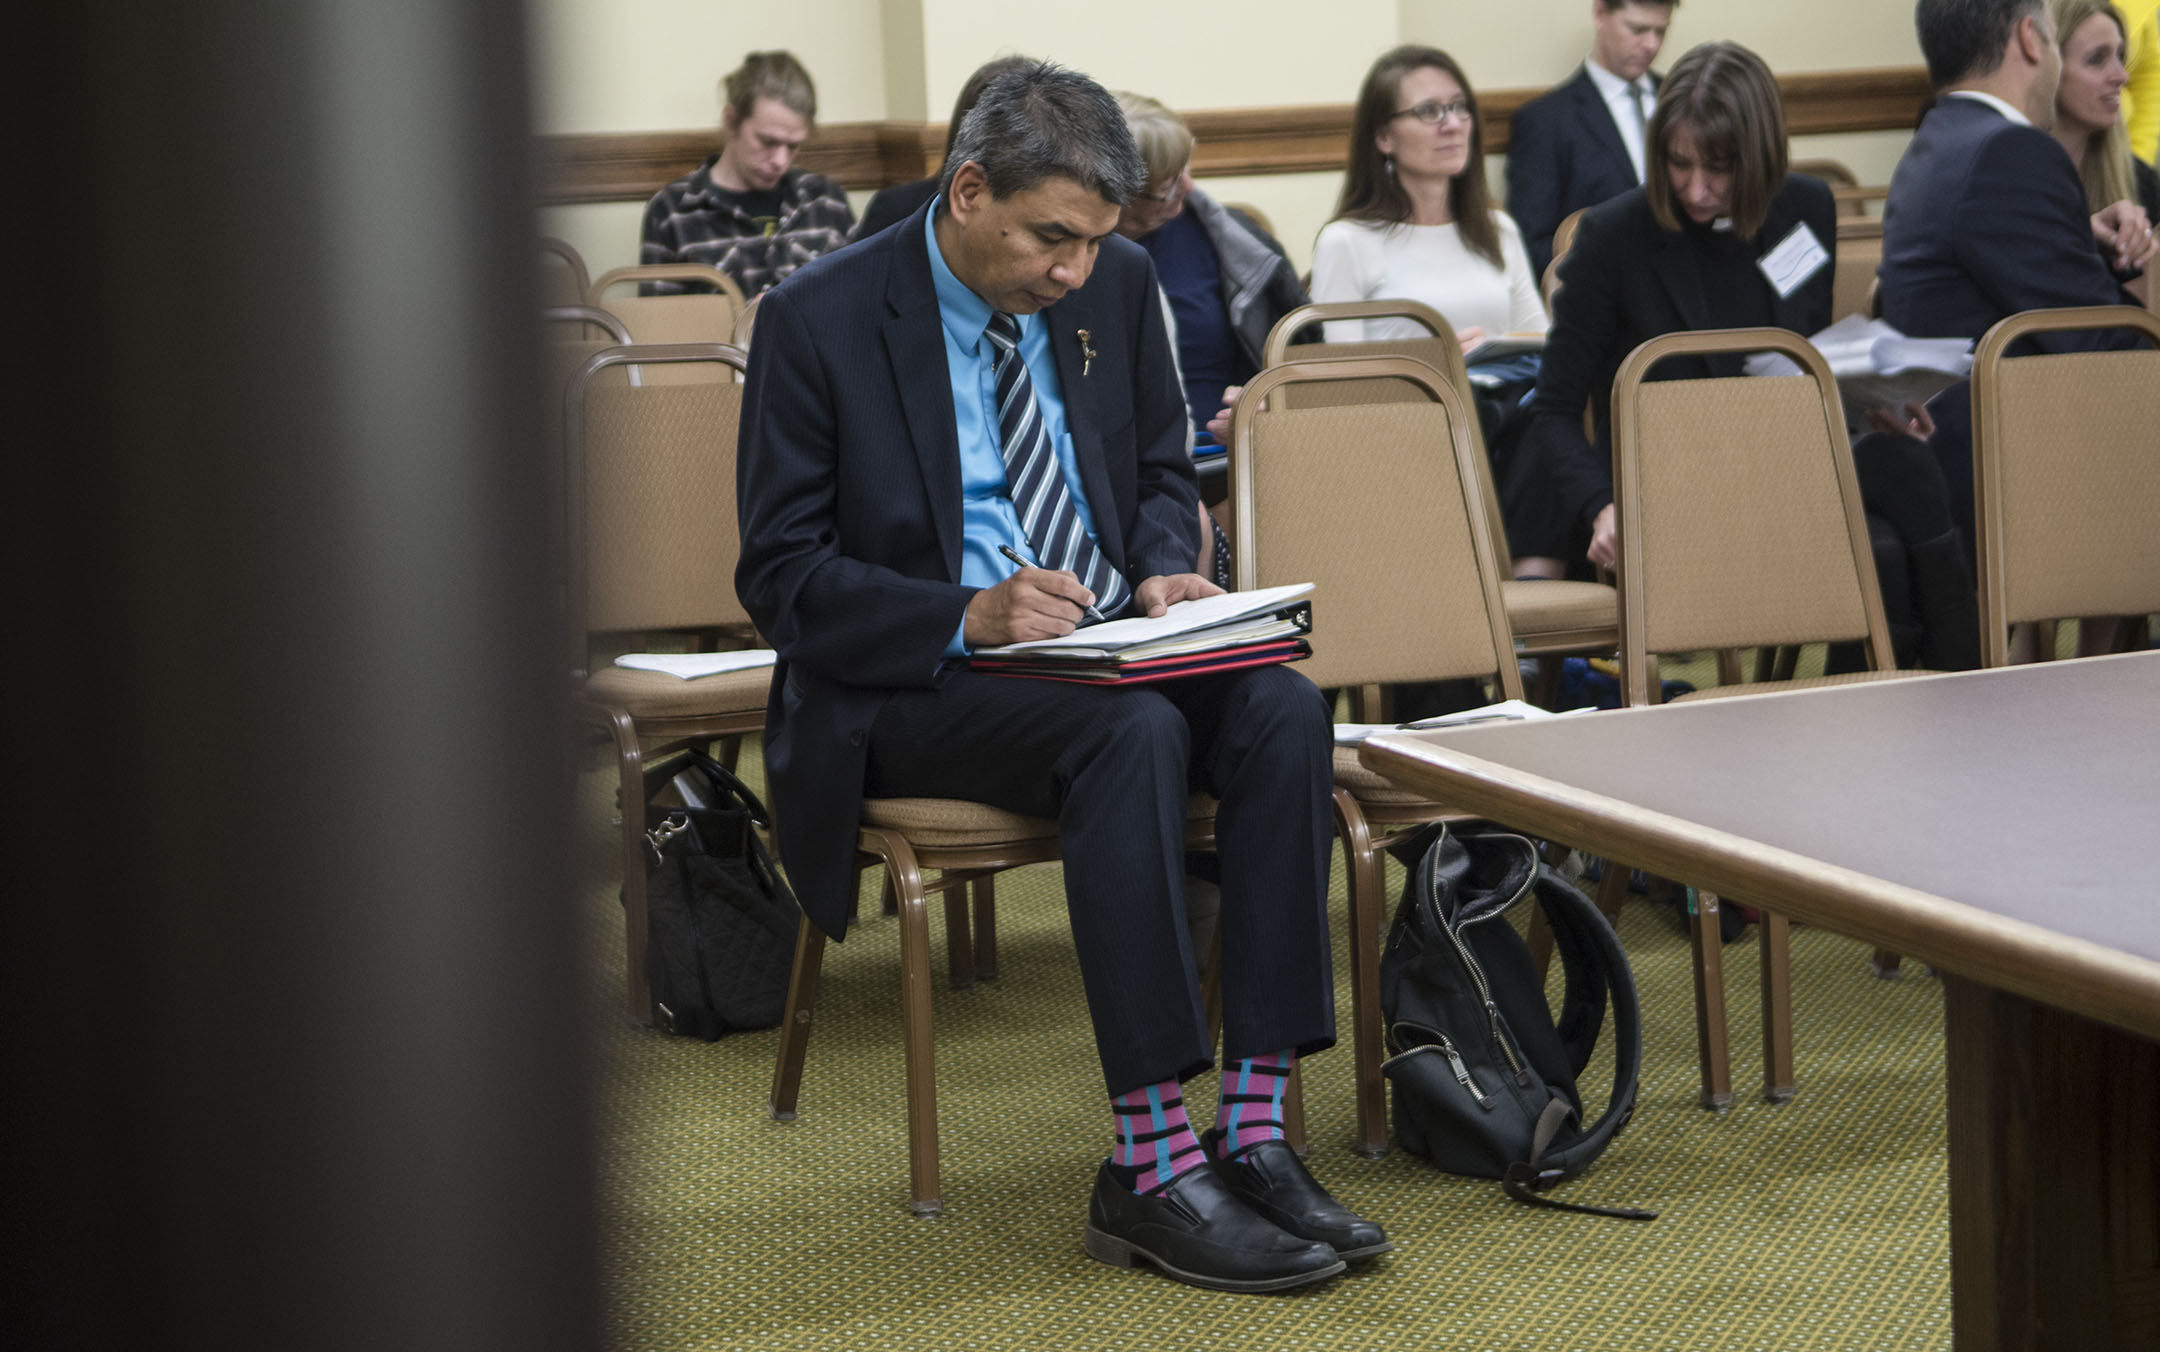 Preparing his notes before testifying in Helena, BirdRattler admits that whenever he speaks before the Blackfeet Tribal Council in Browning, their first question often involves what color socks he’s wearing.